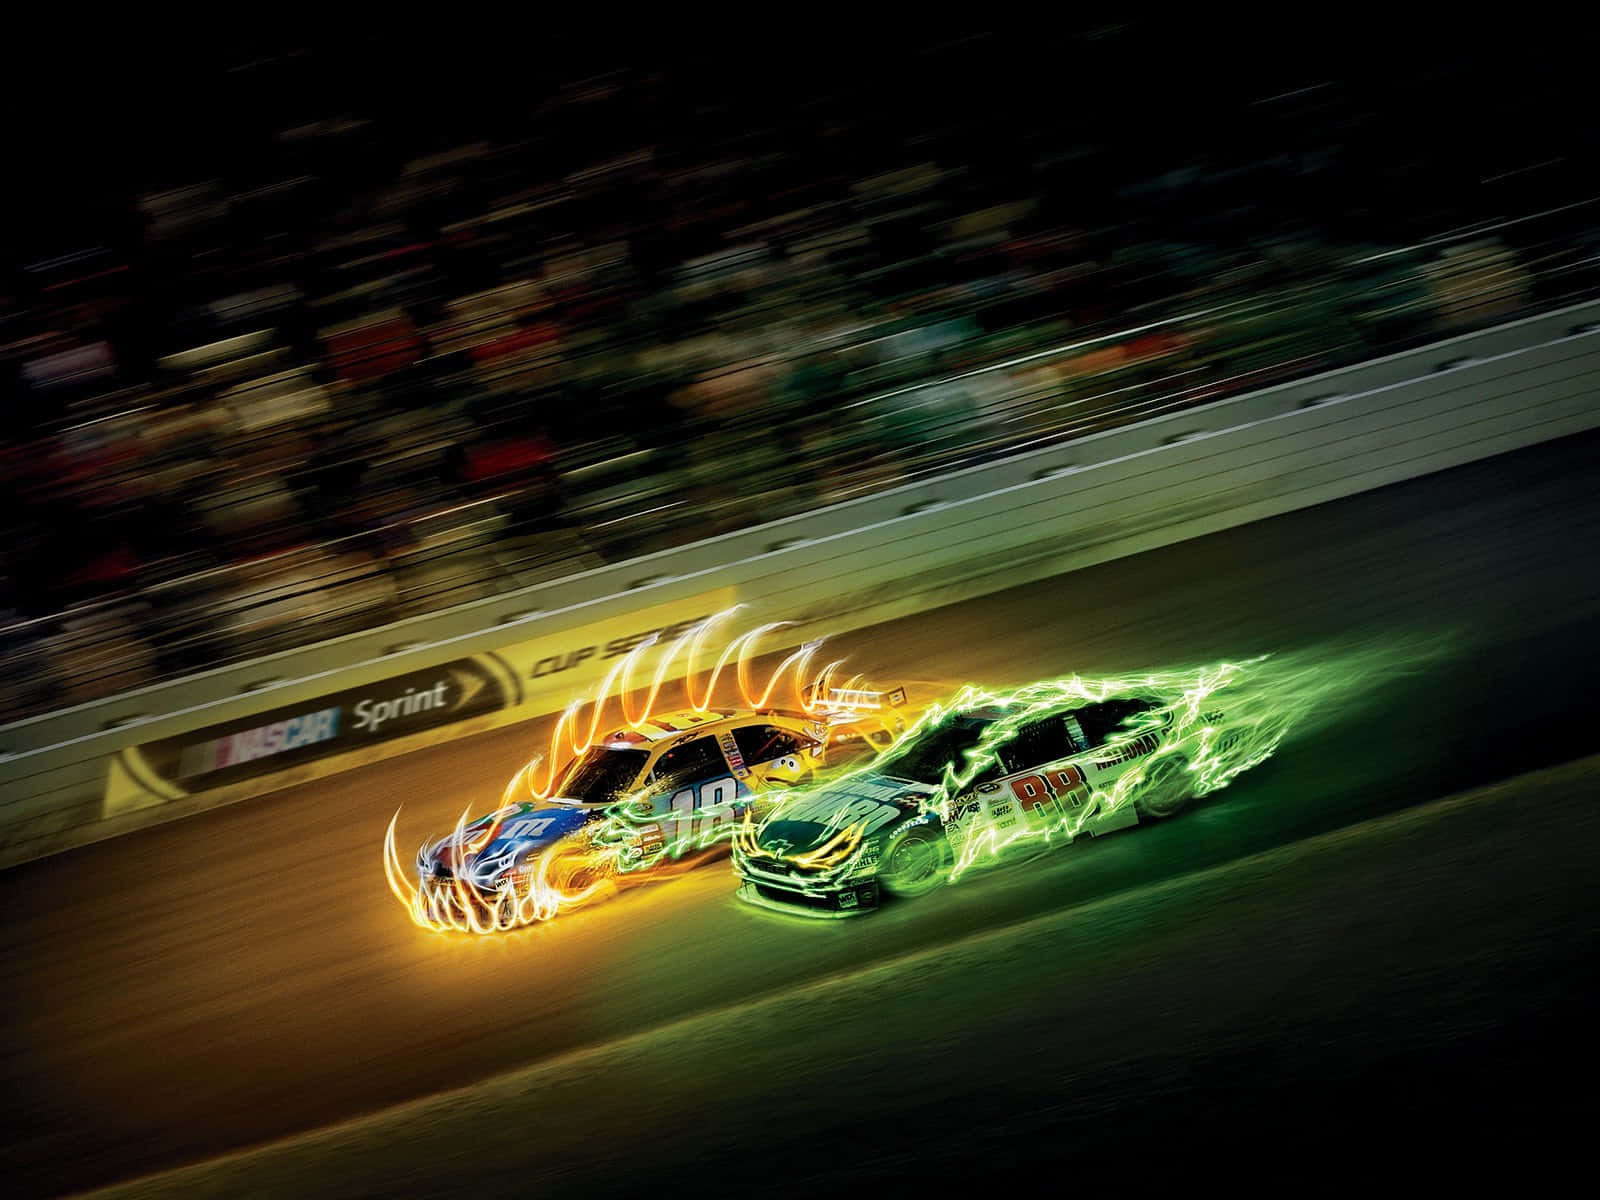 Two Nascar Cars In Flames On A Track Wallpaper